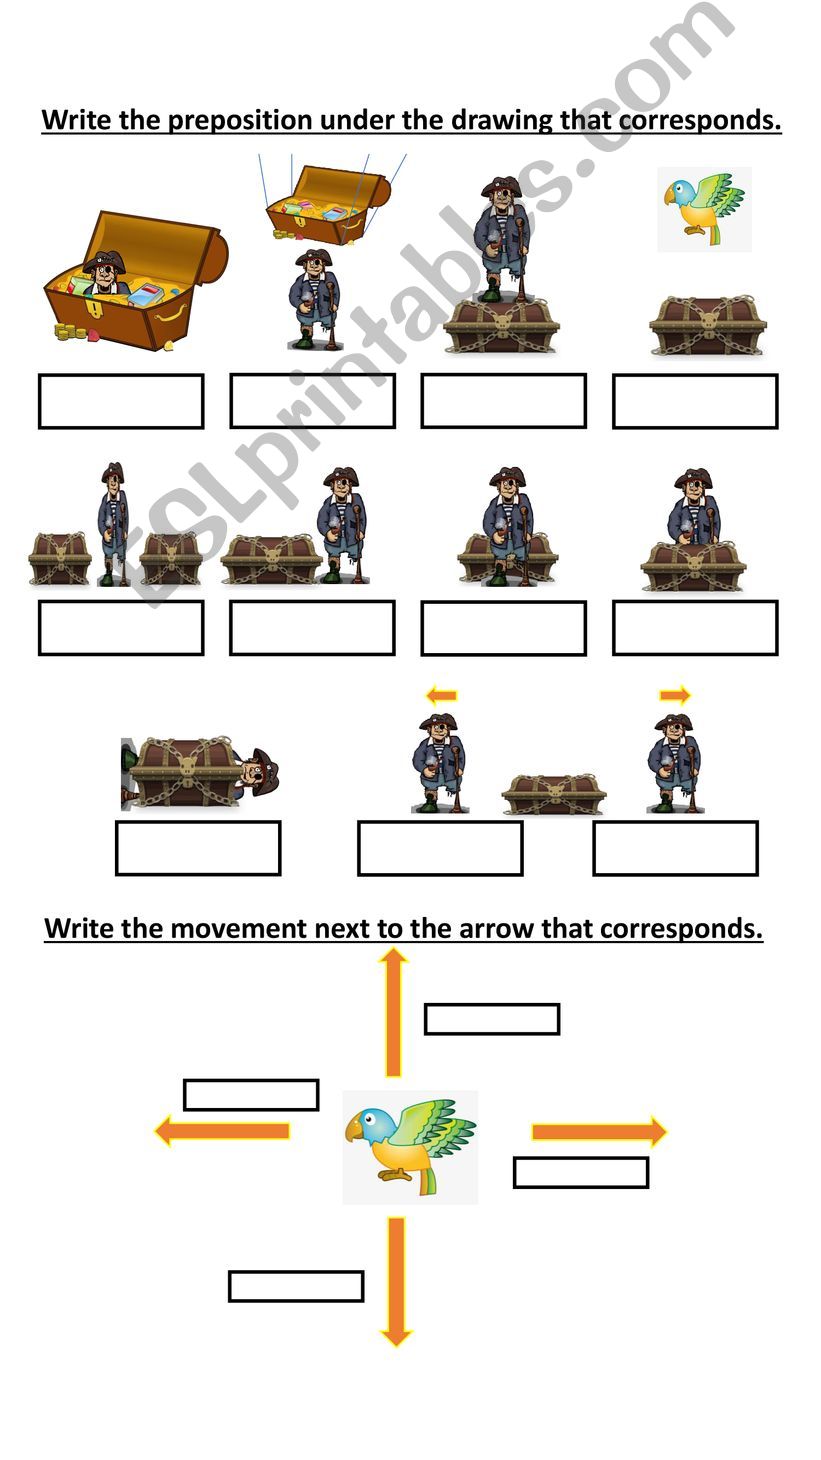 Worksheet - Preposition of places and movement - Pirate Theme